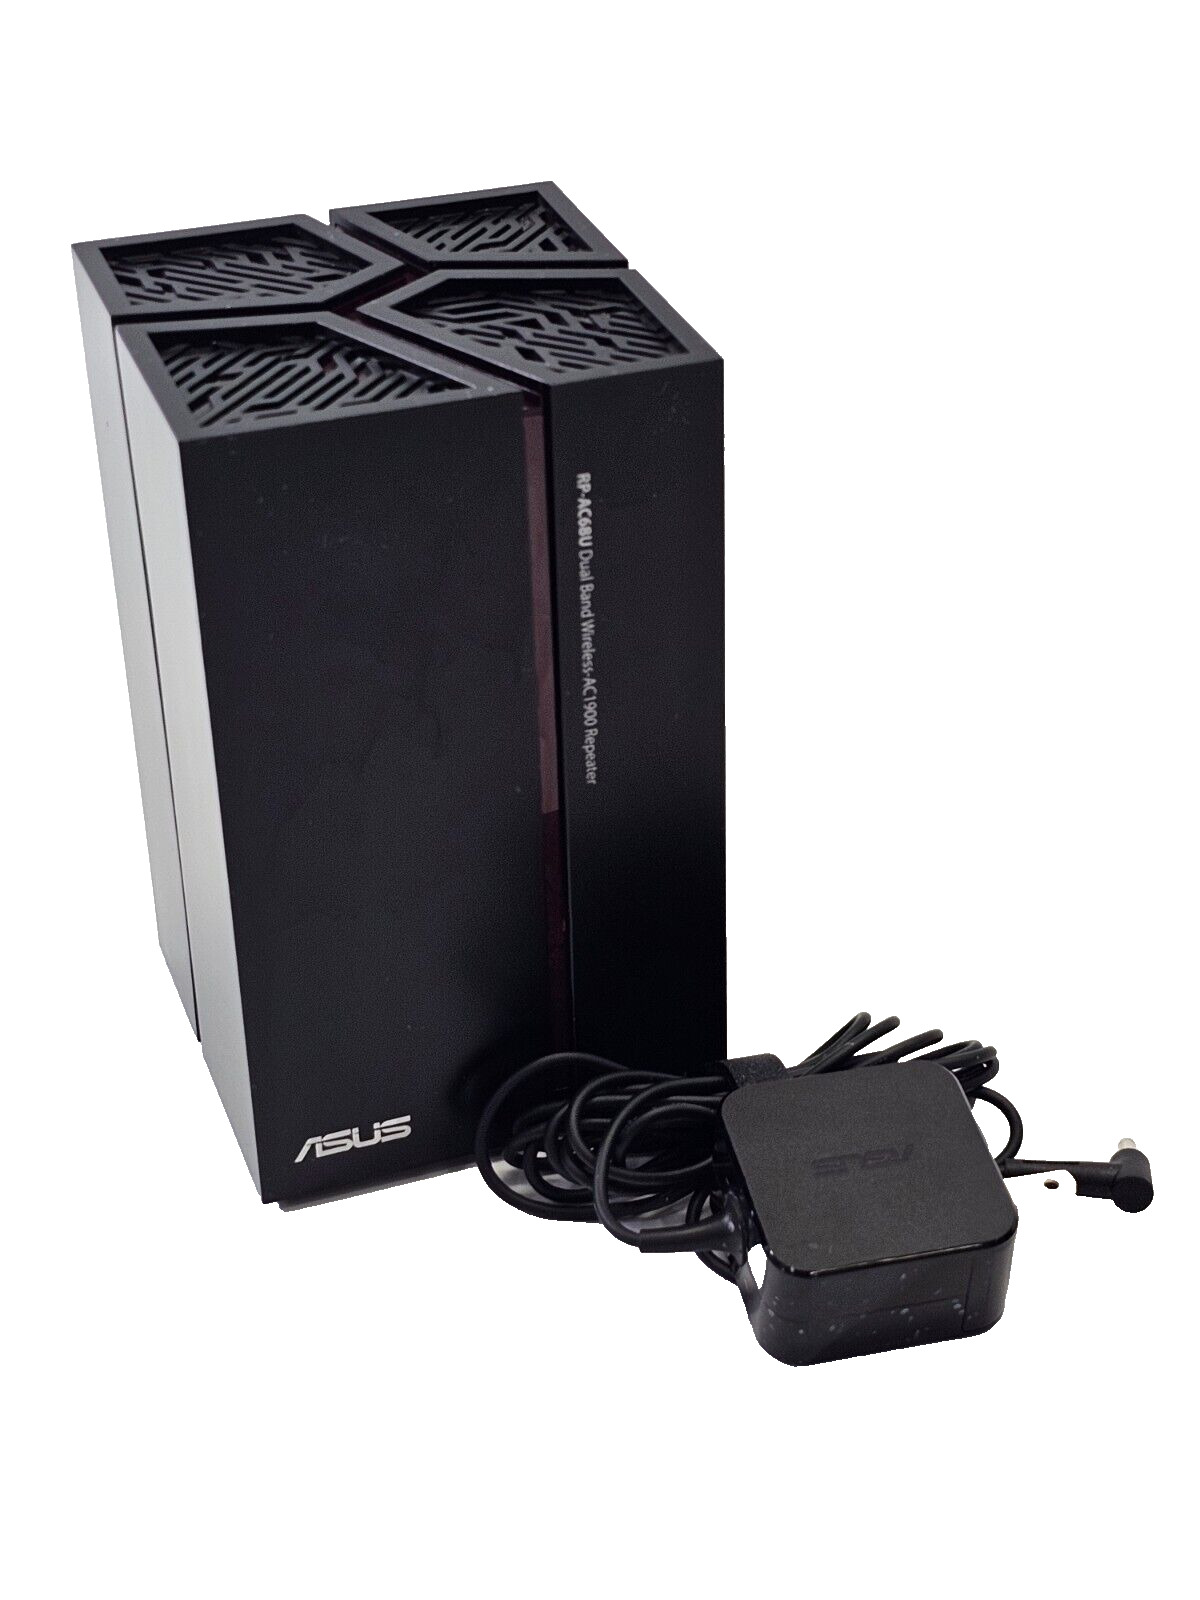 SLV Asus RP-AC68U Dual Band Wireless AC1900 Wi-Fi Repeater 2.4 GHz & 5 GHz Freq.